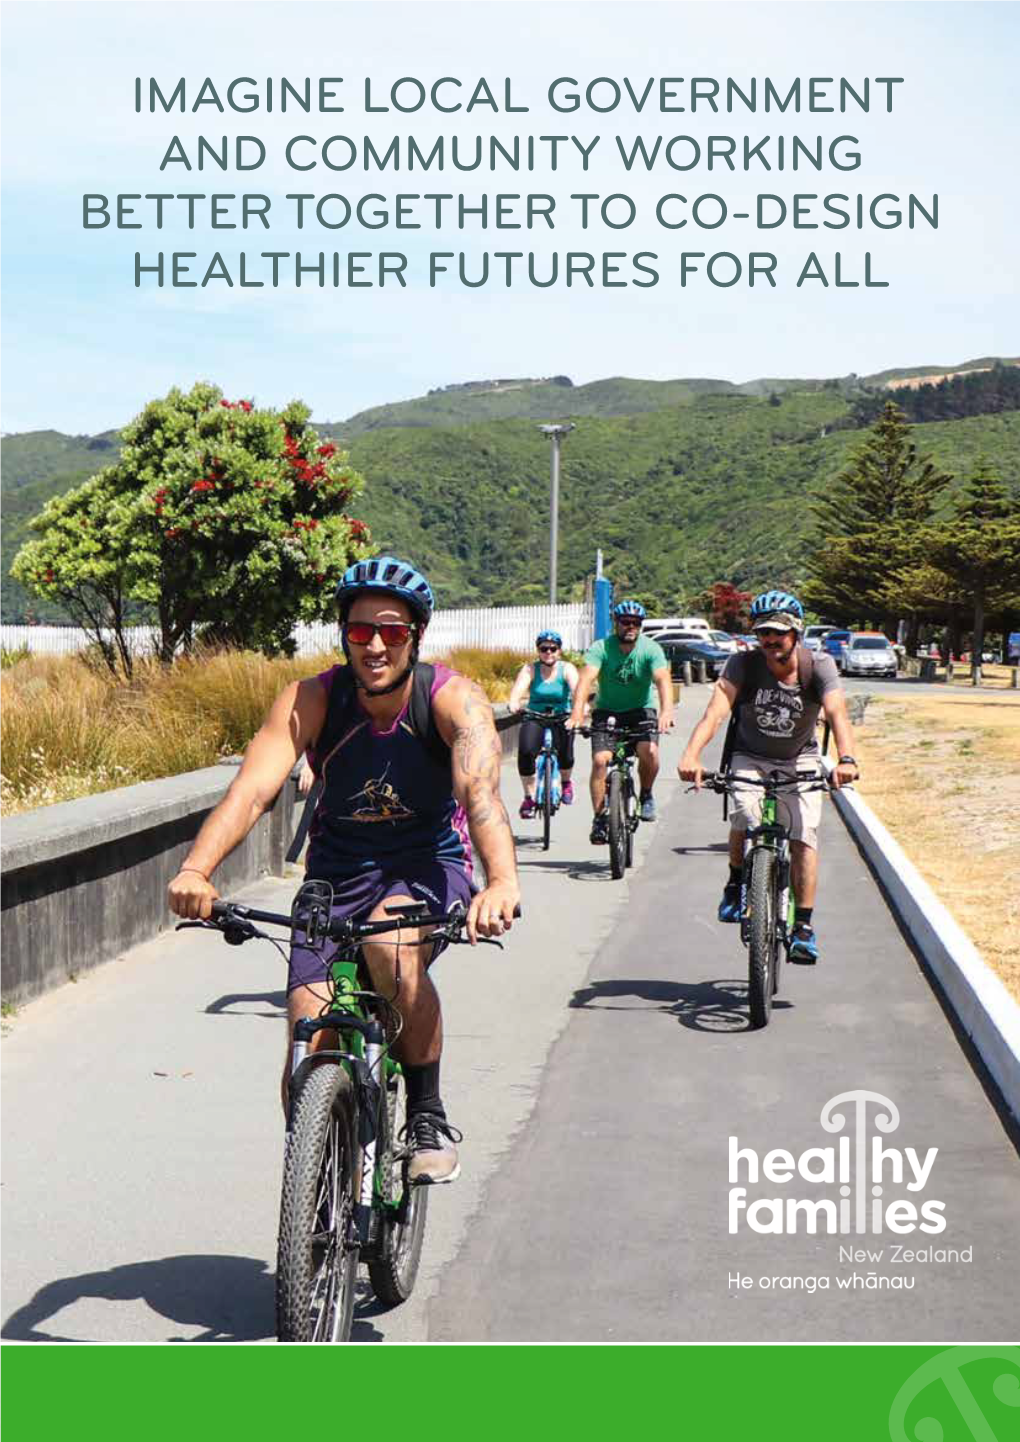 Imagine Local Government and Community Working Better Together to Co-Design Healthier Futures for All